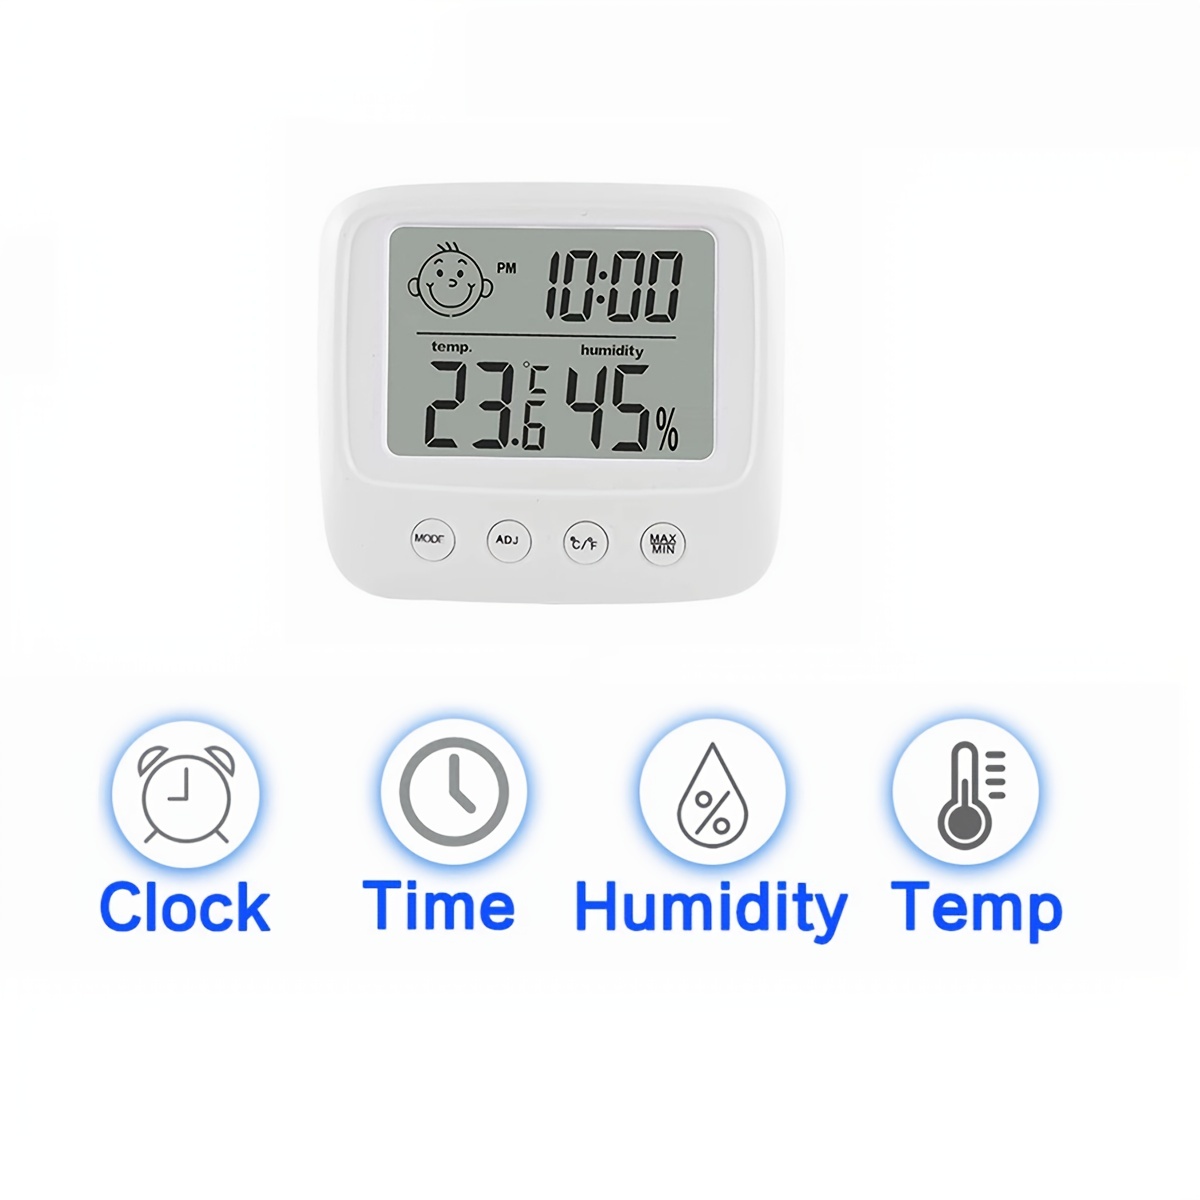 OH-2+ Digital Hygrometer / Thermometer